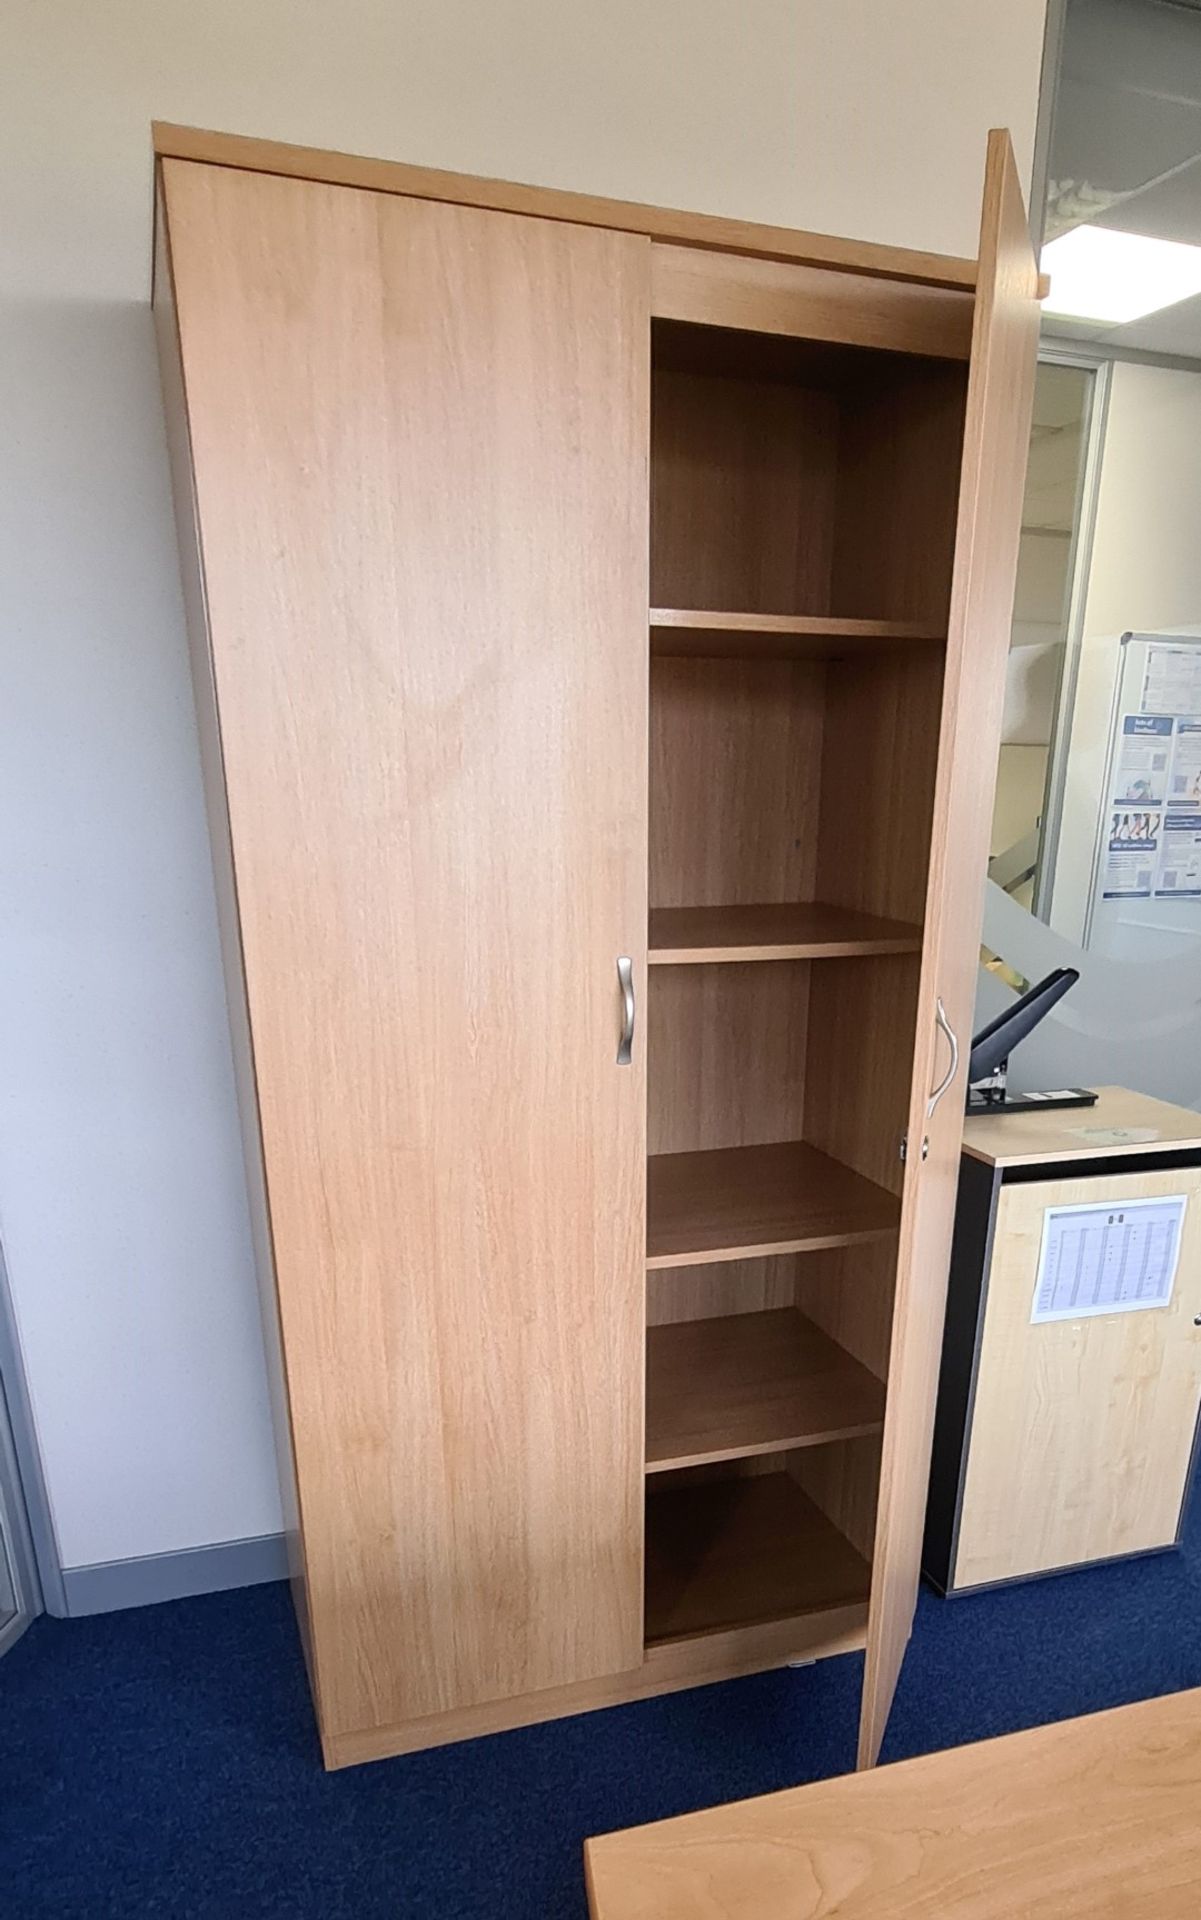 1 x Upright Office Storage Cupboard with Adjustable Shelves and Beech Finish - Ref: 1 x PK016 -